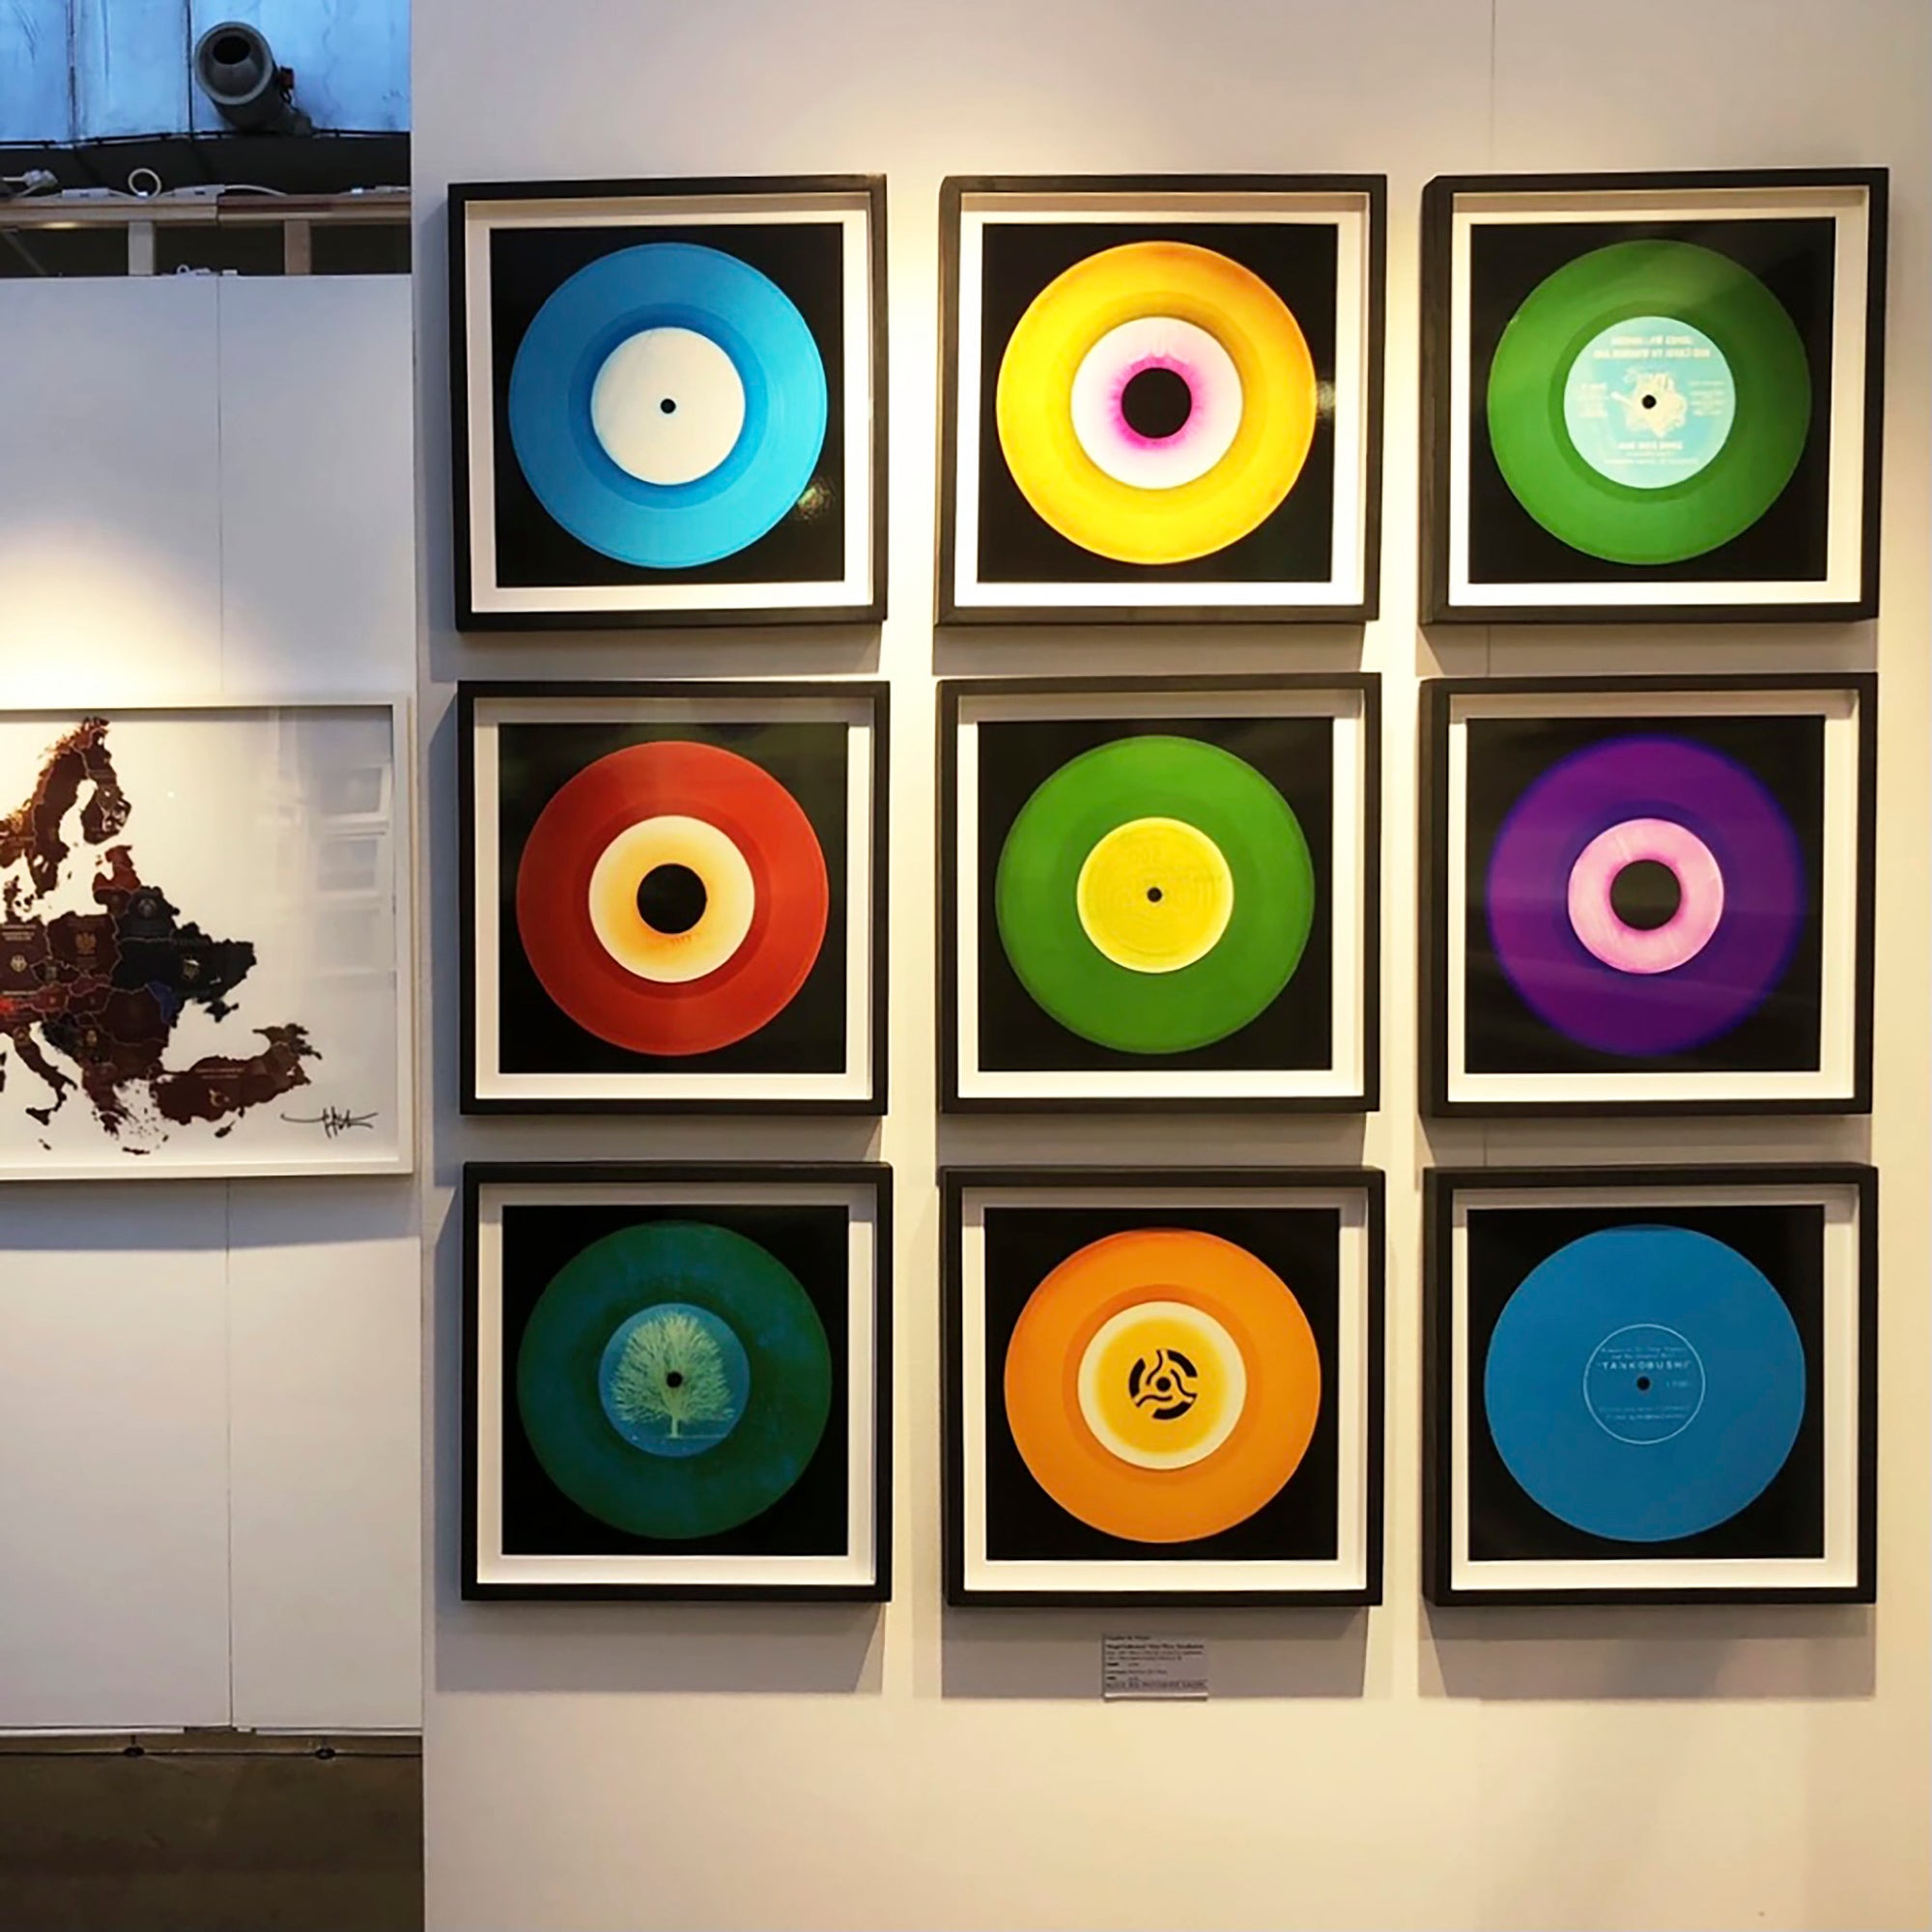 Vinyl Collection 'This Side' (Forest Green). Acclaimed contemporary photographers, Richard Heeps and Natasha Heidler have collaborated to make this beautifully mesmerising collection. A celebration of the vinyl record and analogue technology, which reflects the artists practice within photography.